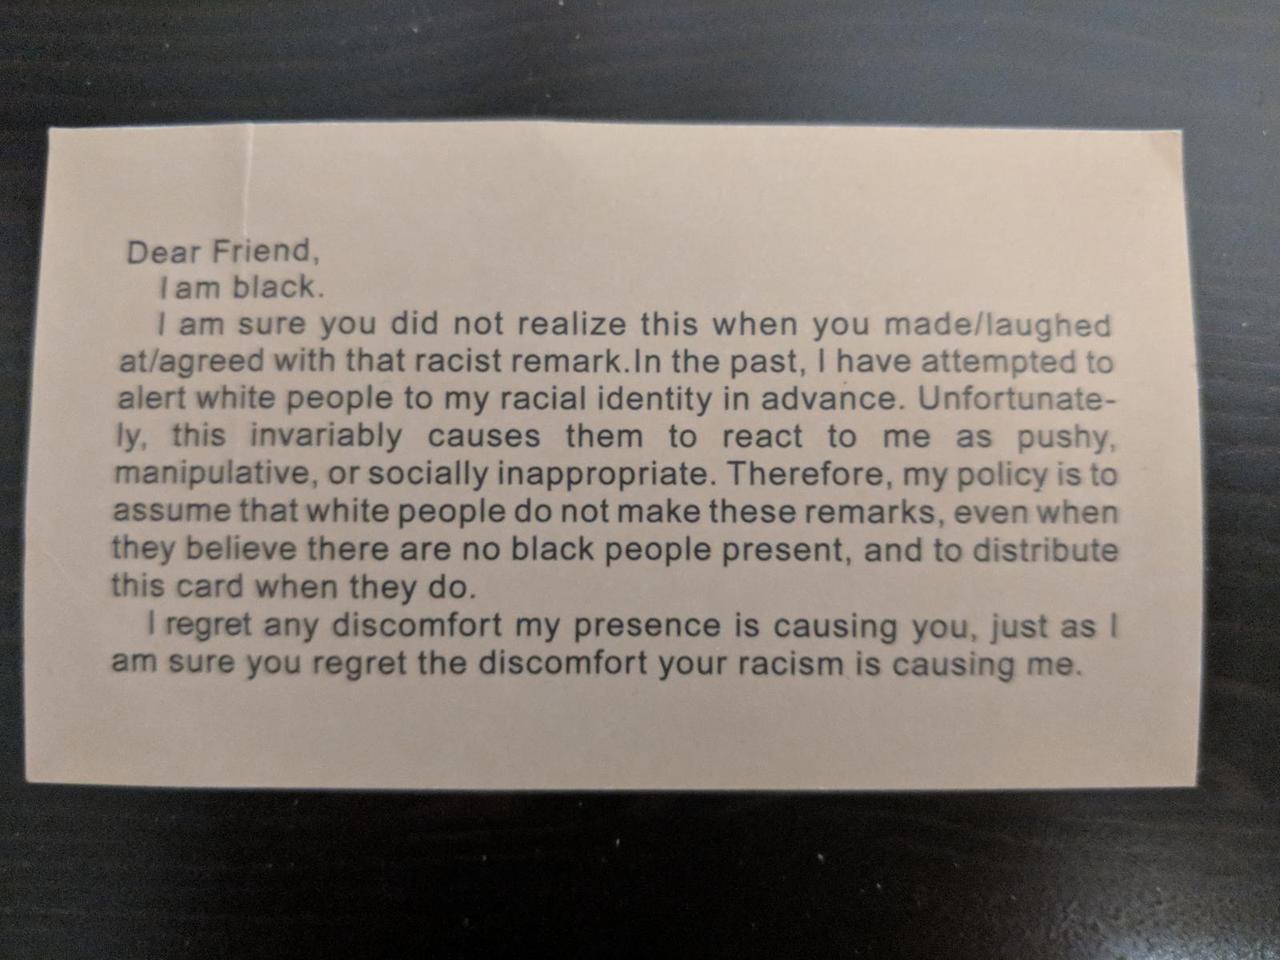 business card that starts with the words, "Dear friend, I am black." It continues by calling people out on their racism.